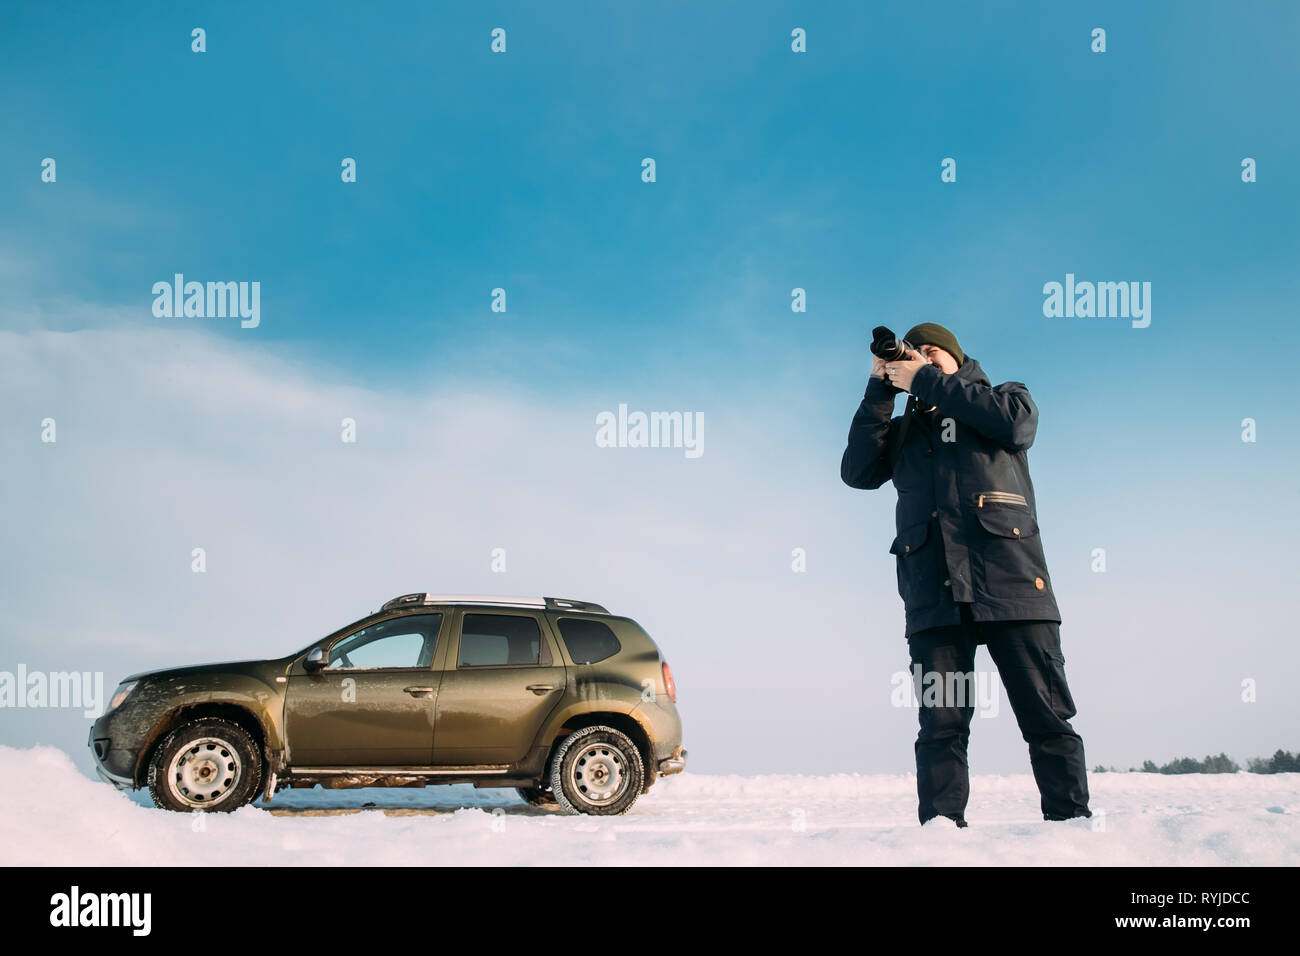 Gomel, Belarus - January 10, 2019: Young Man Taking Photo On Background Of Car Renault Duster Or Dacia Duster Suv Parked On Roadside At Winter Day. Stock Photo